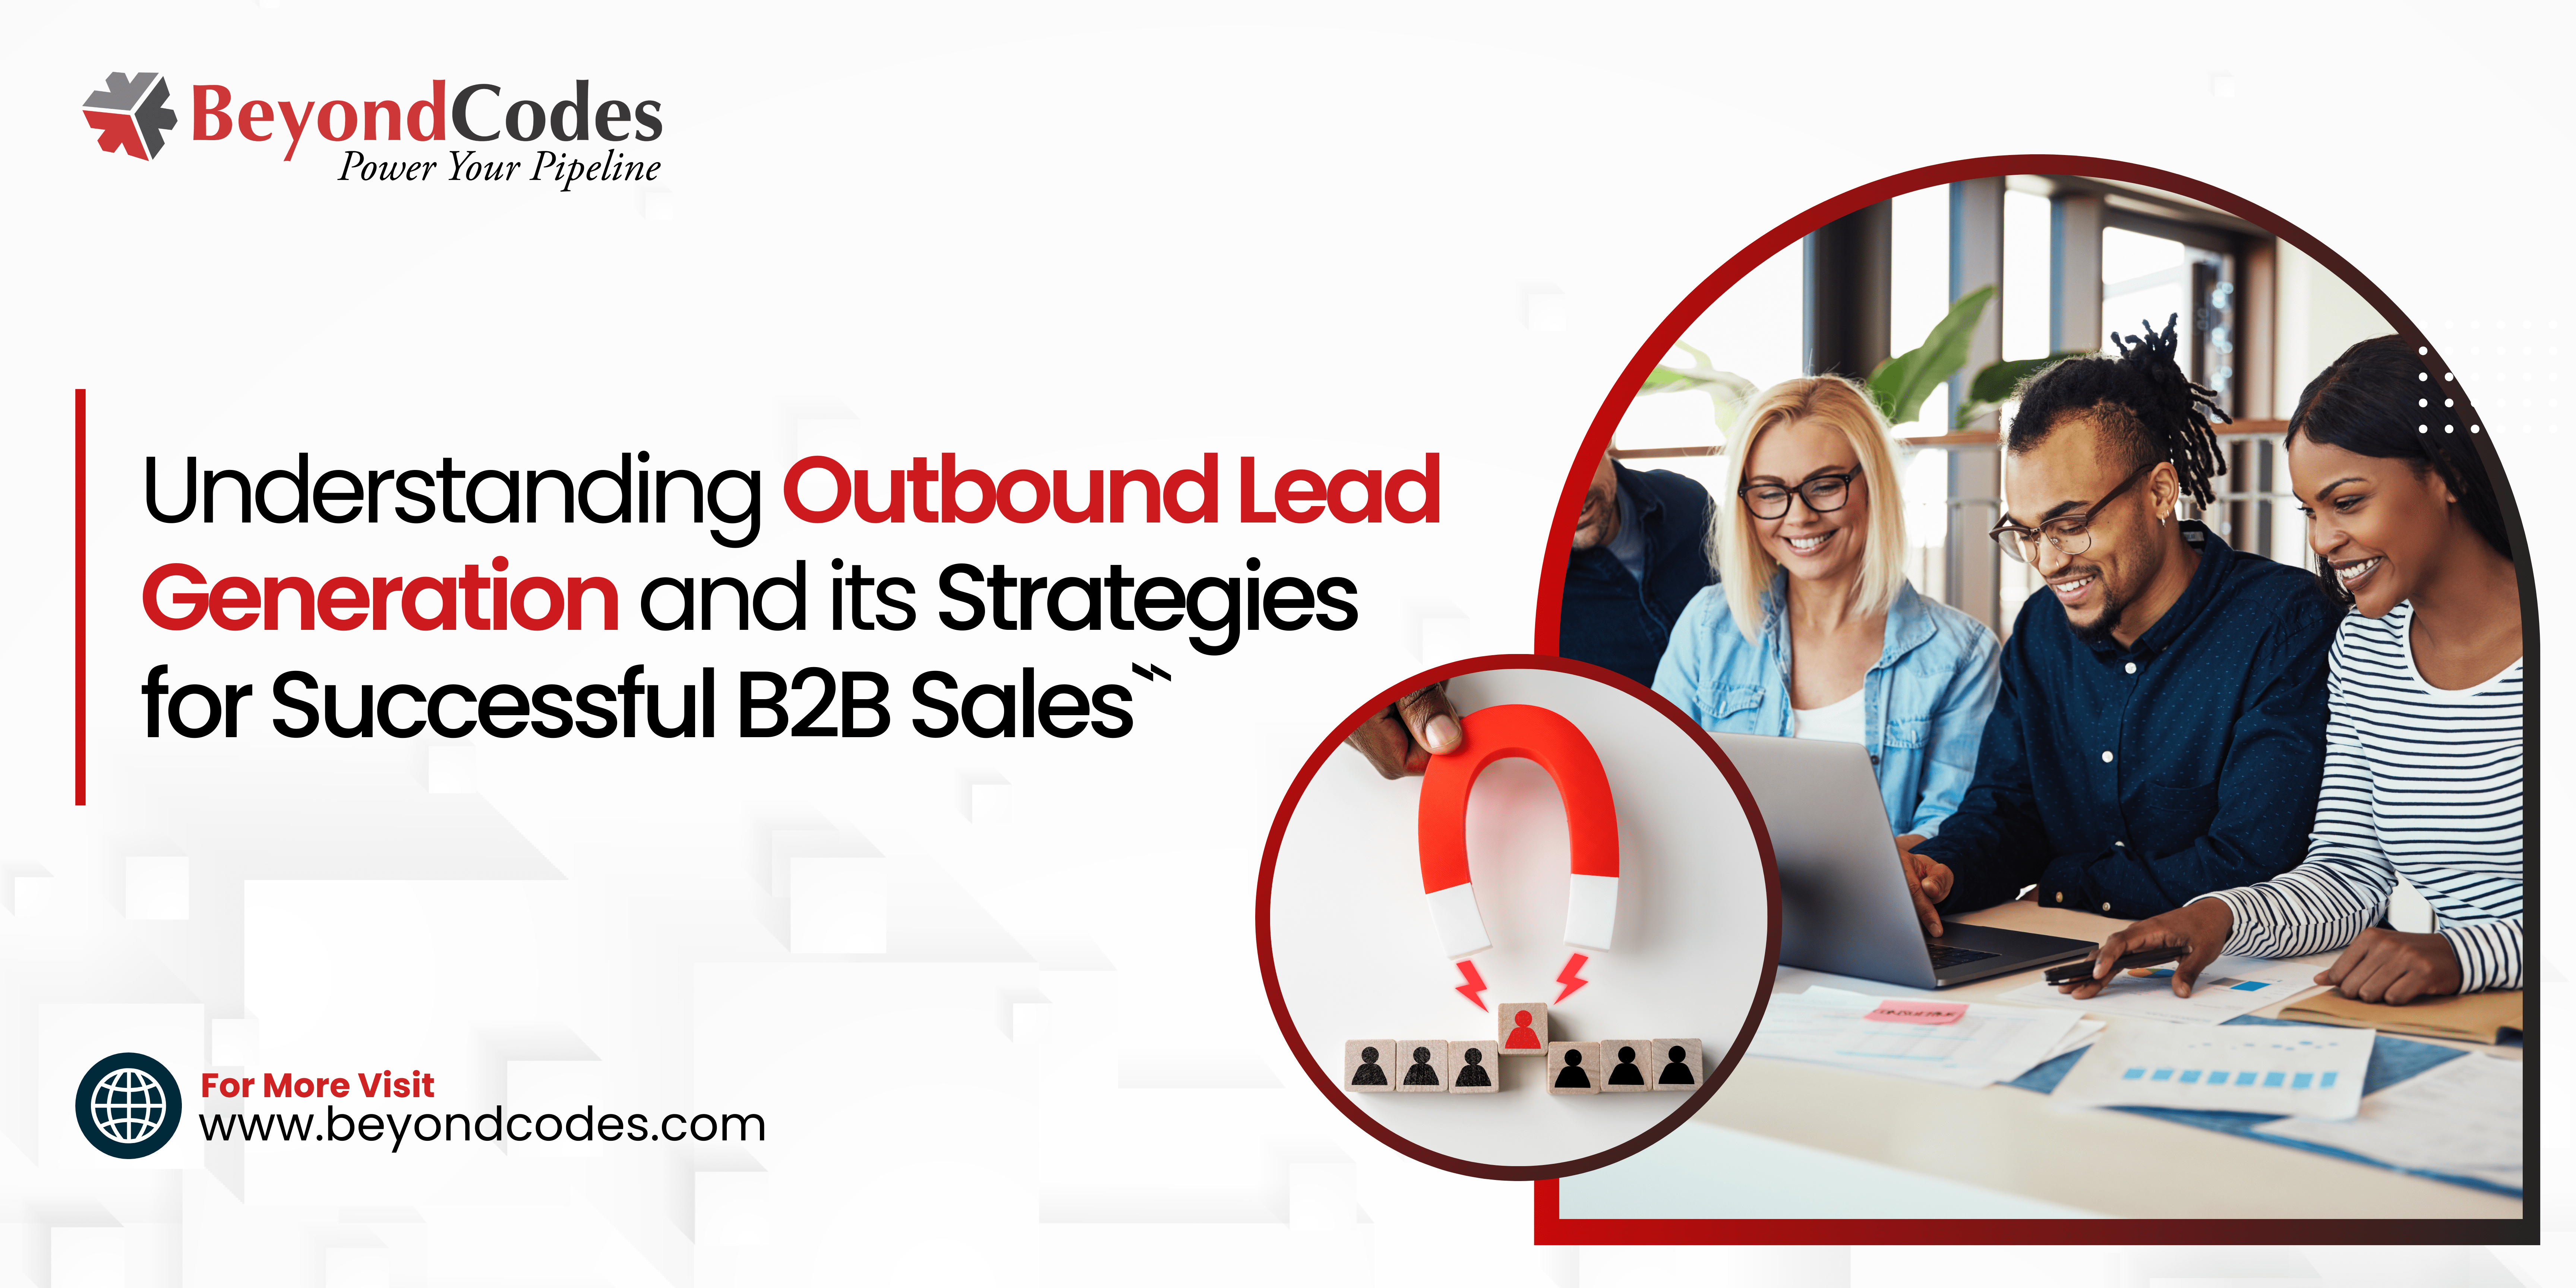 Understanding Outbound Lead Generation and its Strategies for Successful B2B Sales